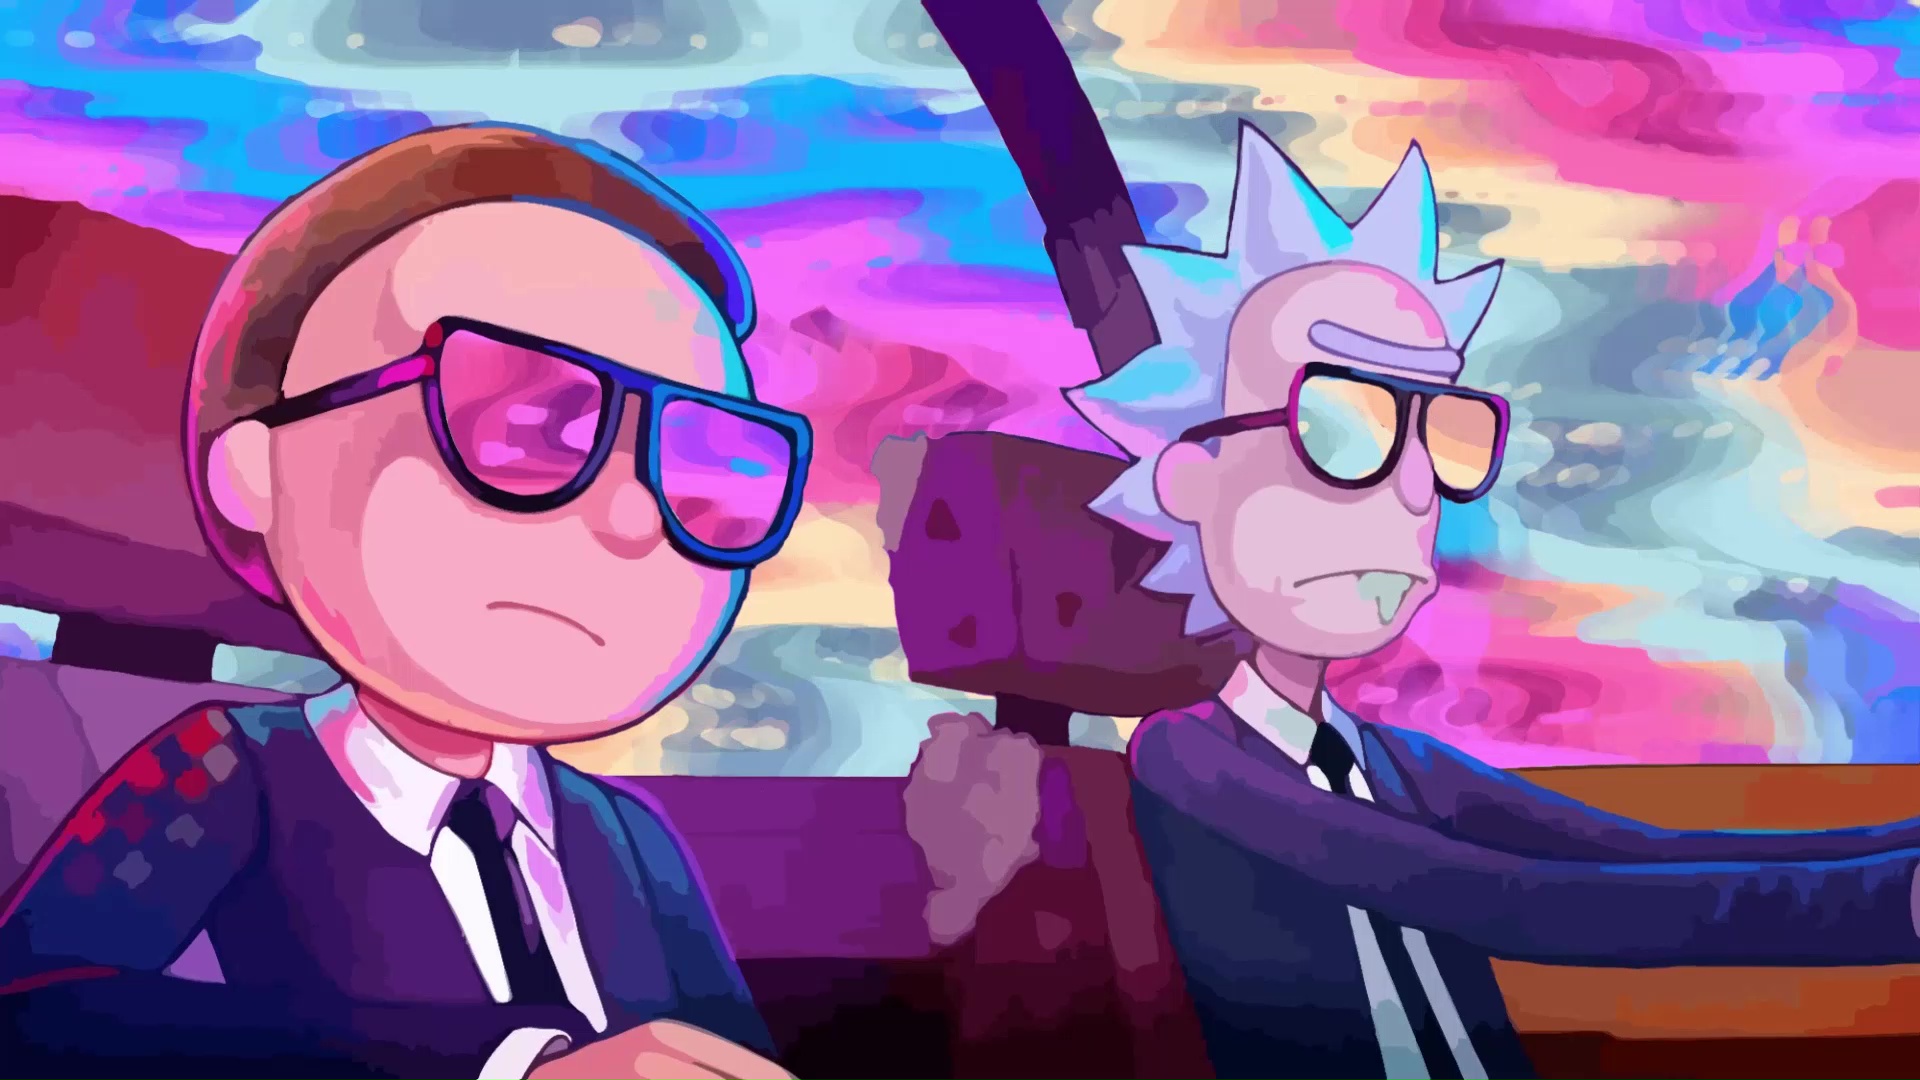 Rick And Morty Live Wallpapers Animated Wallpapers Moewalls The Best